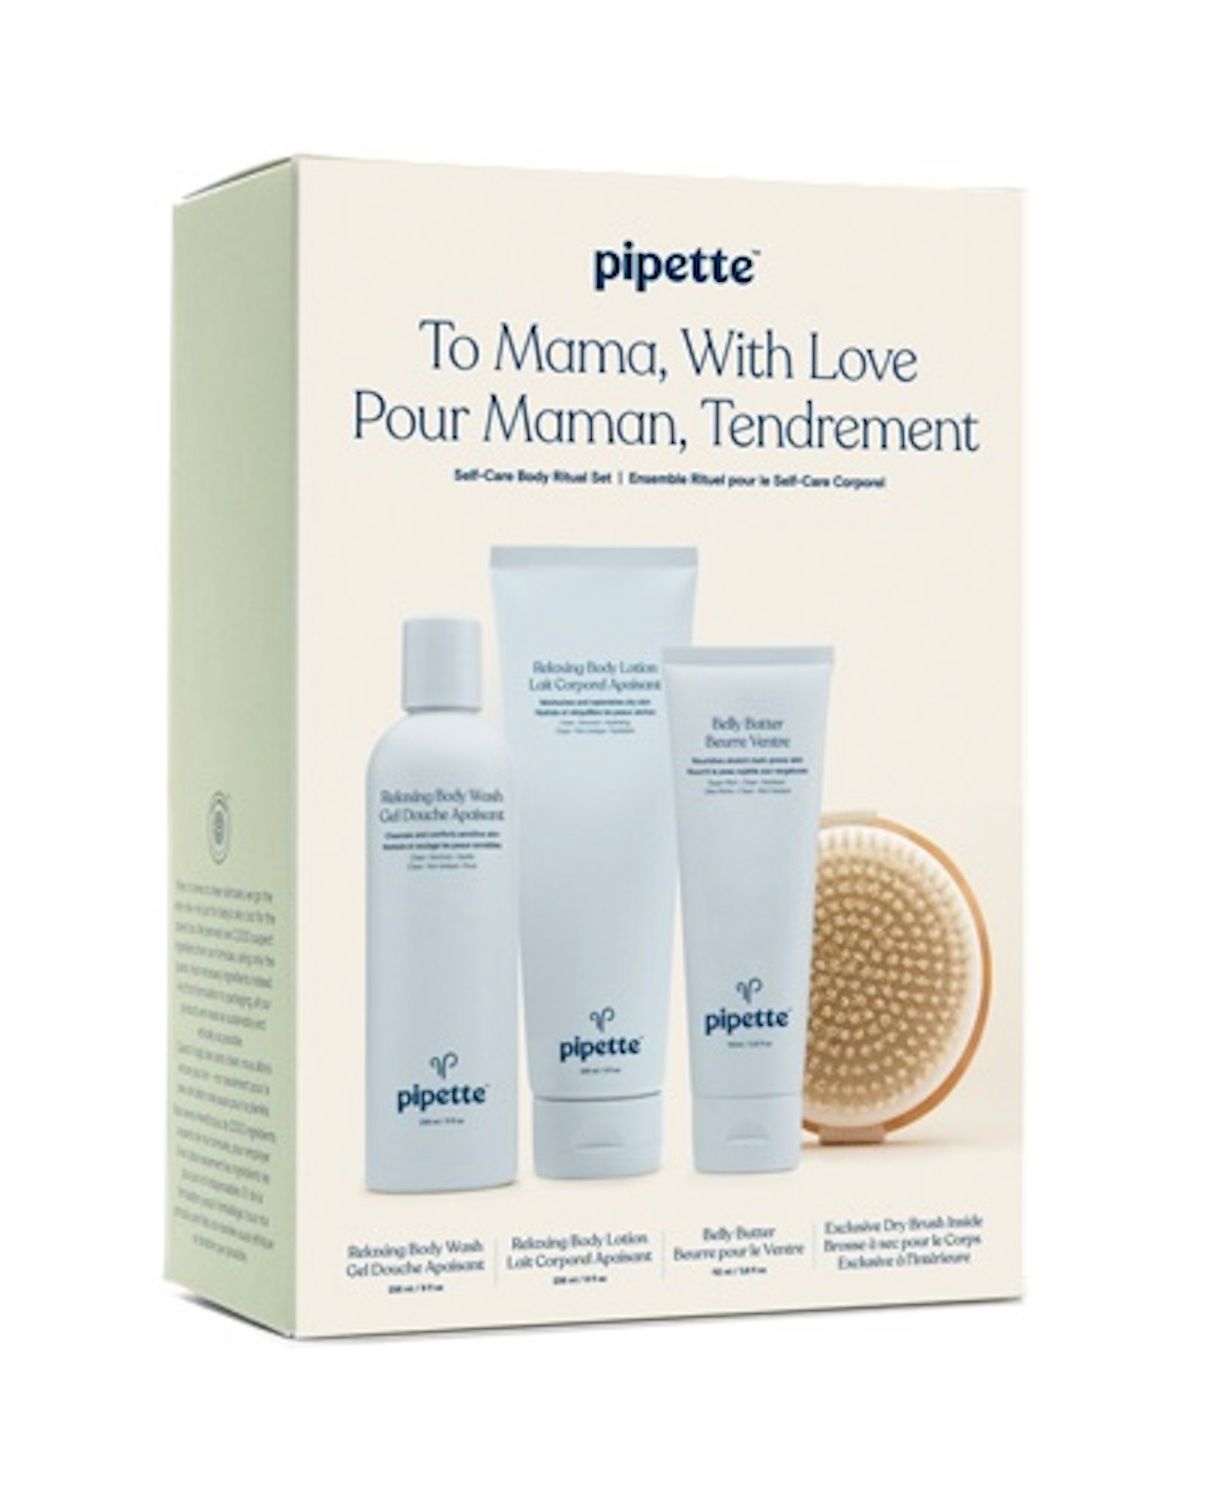 Pipette To Mama with Love Bundle - 4 pc